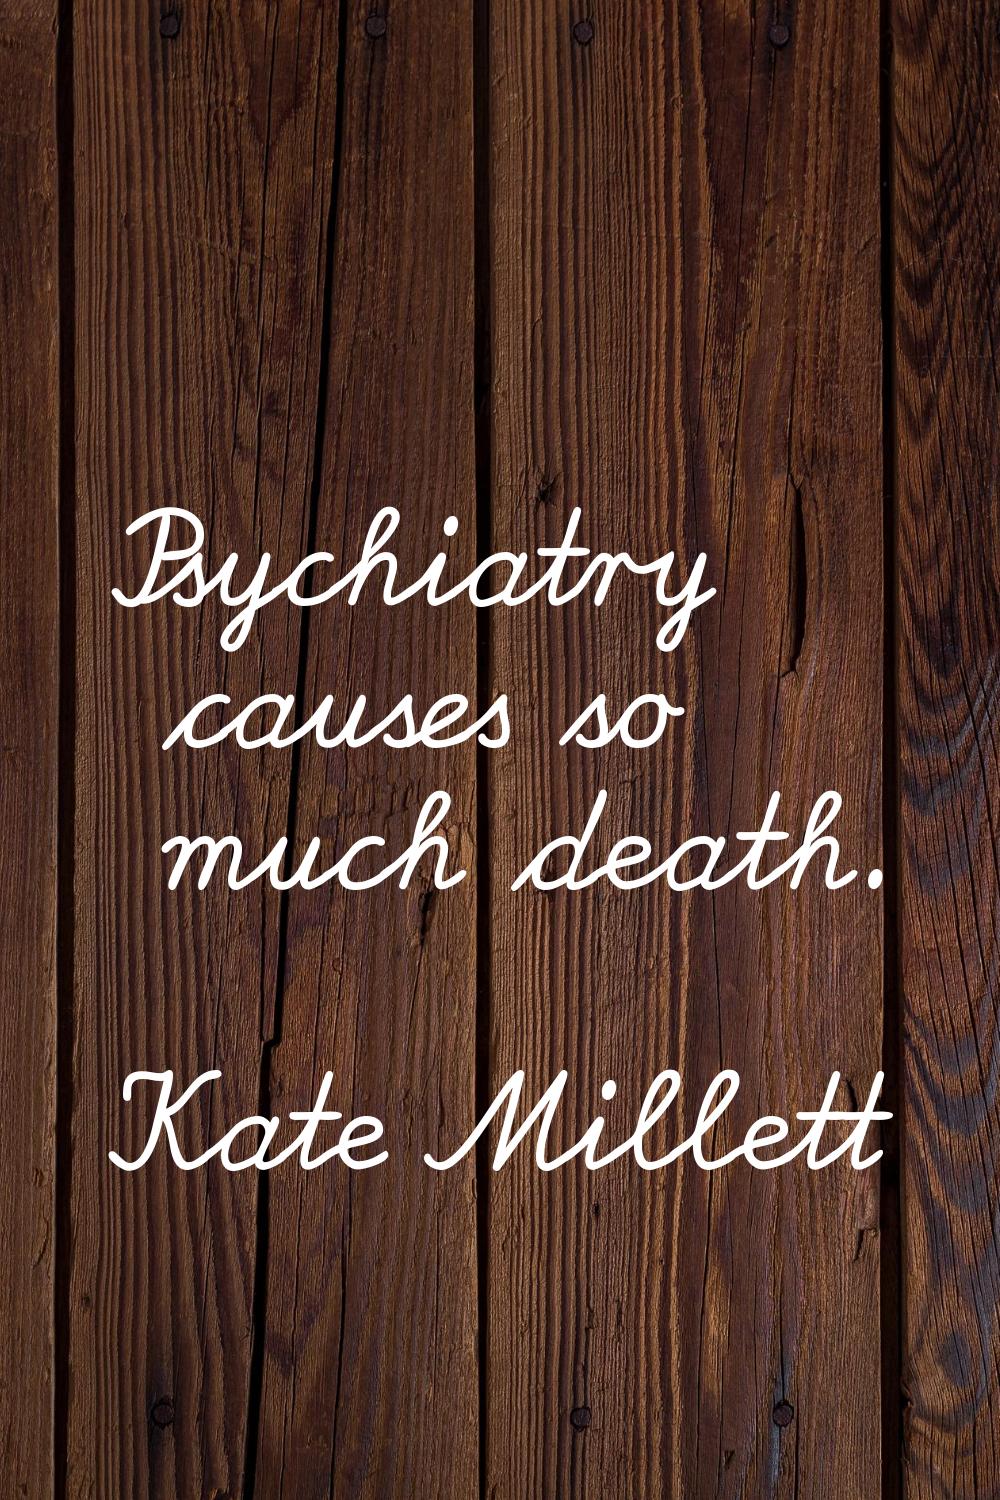 Psychiatry causes so much death.